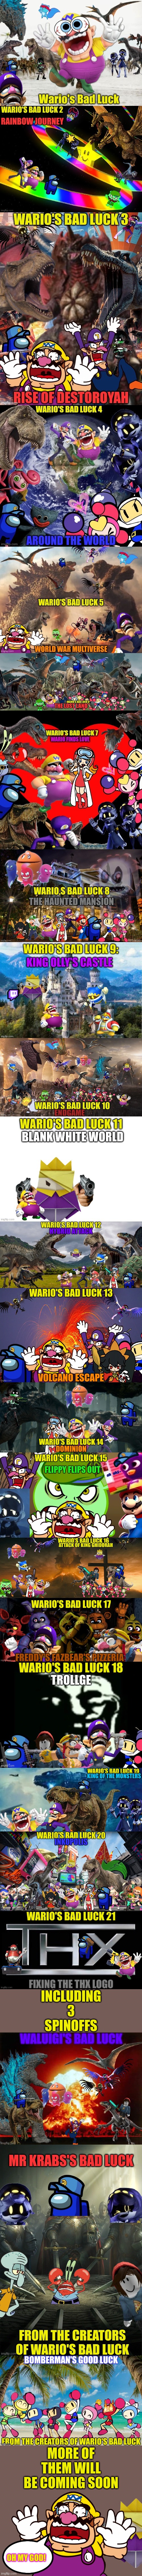 Wario's Bad Luck Big Collection.mp3 | image tagged in wario dies,wario,so much images,oh my god,too many tags | made w/ Imgflip meme maker